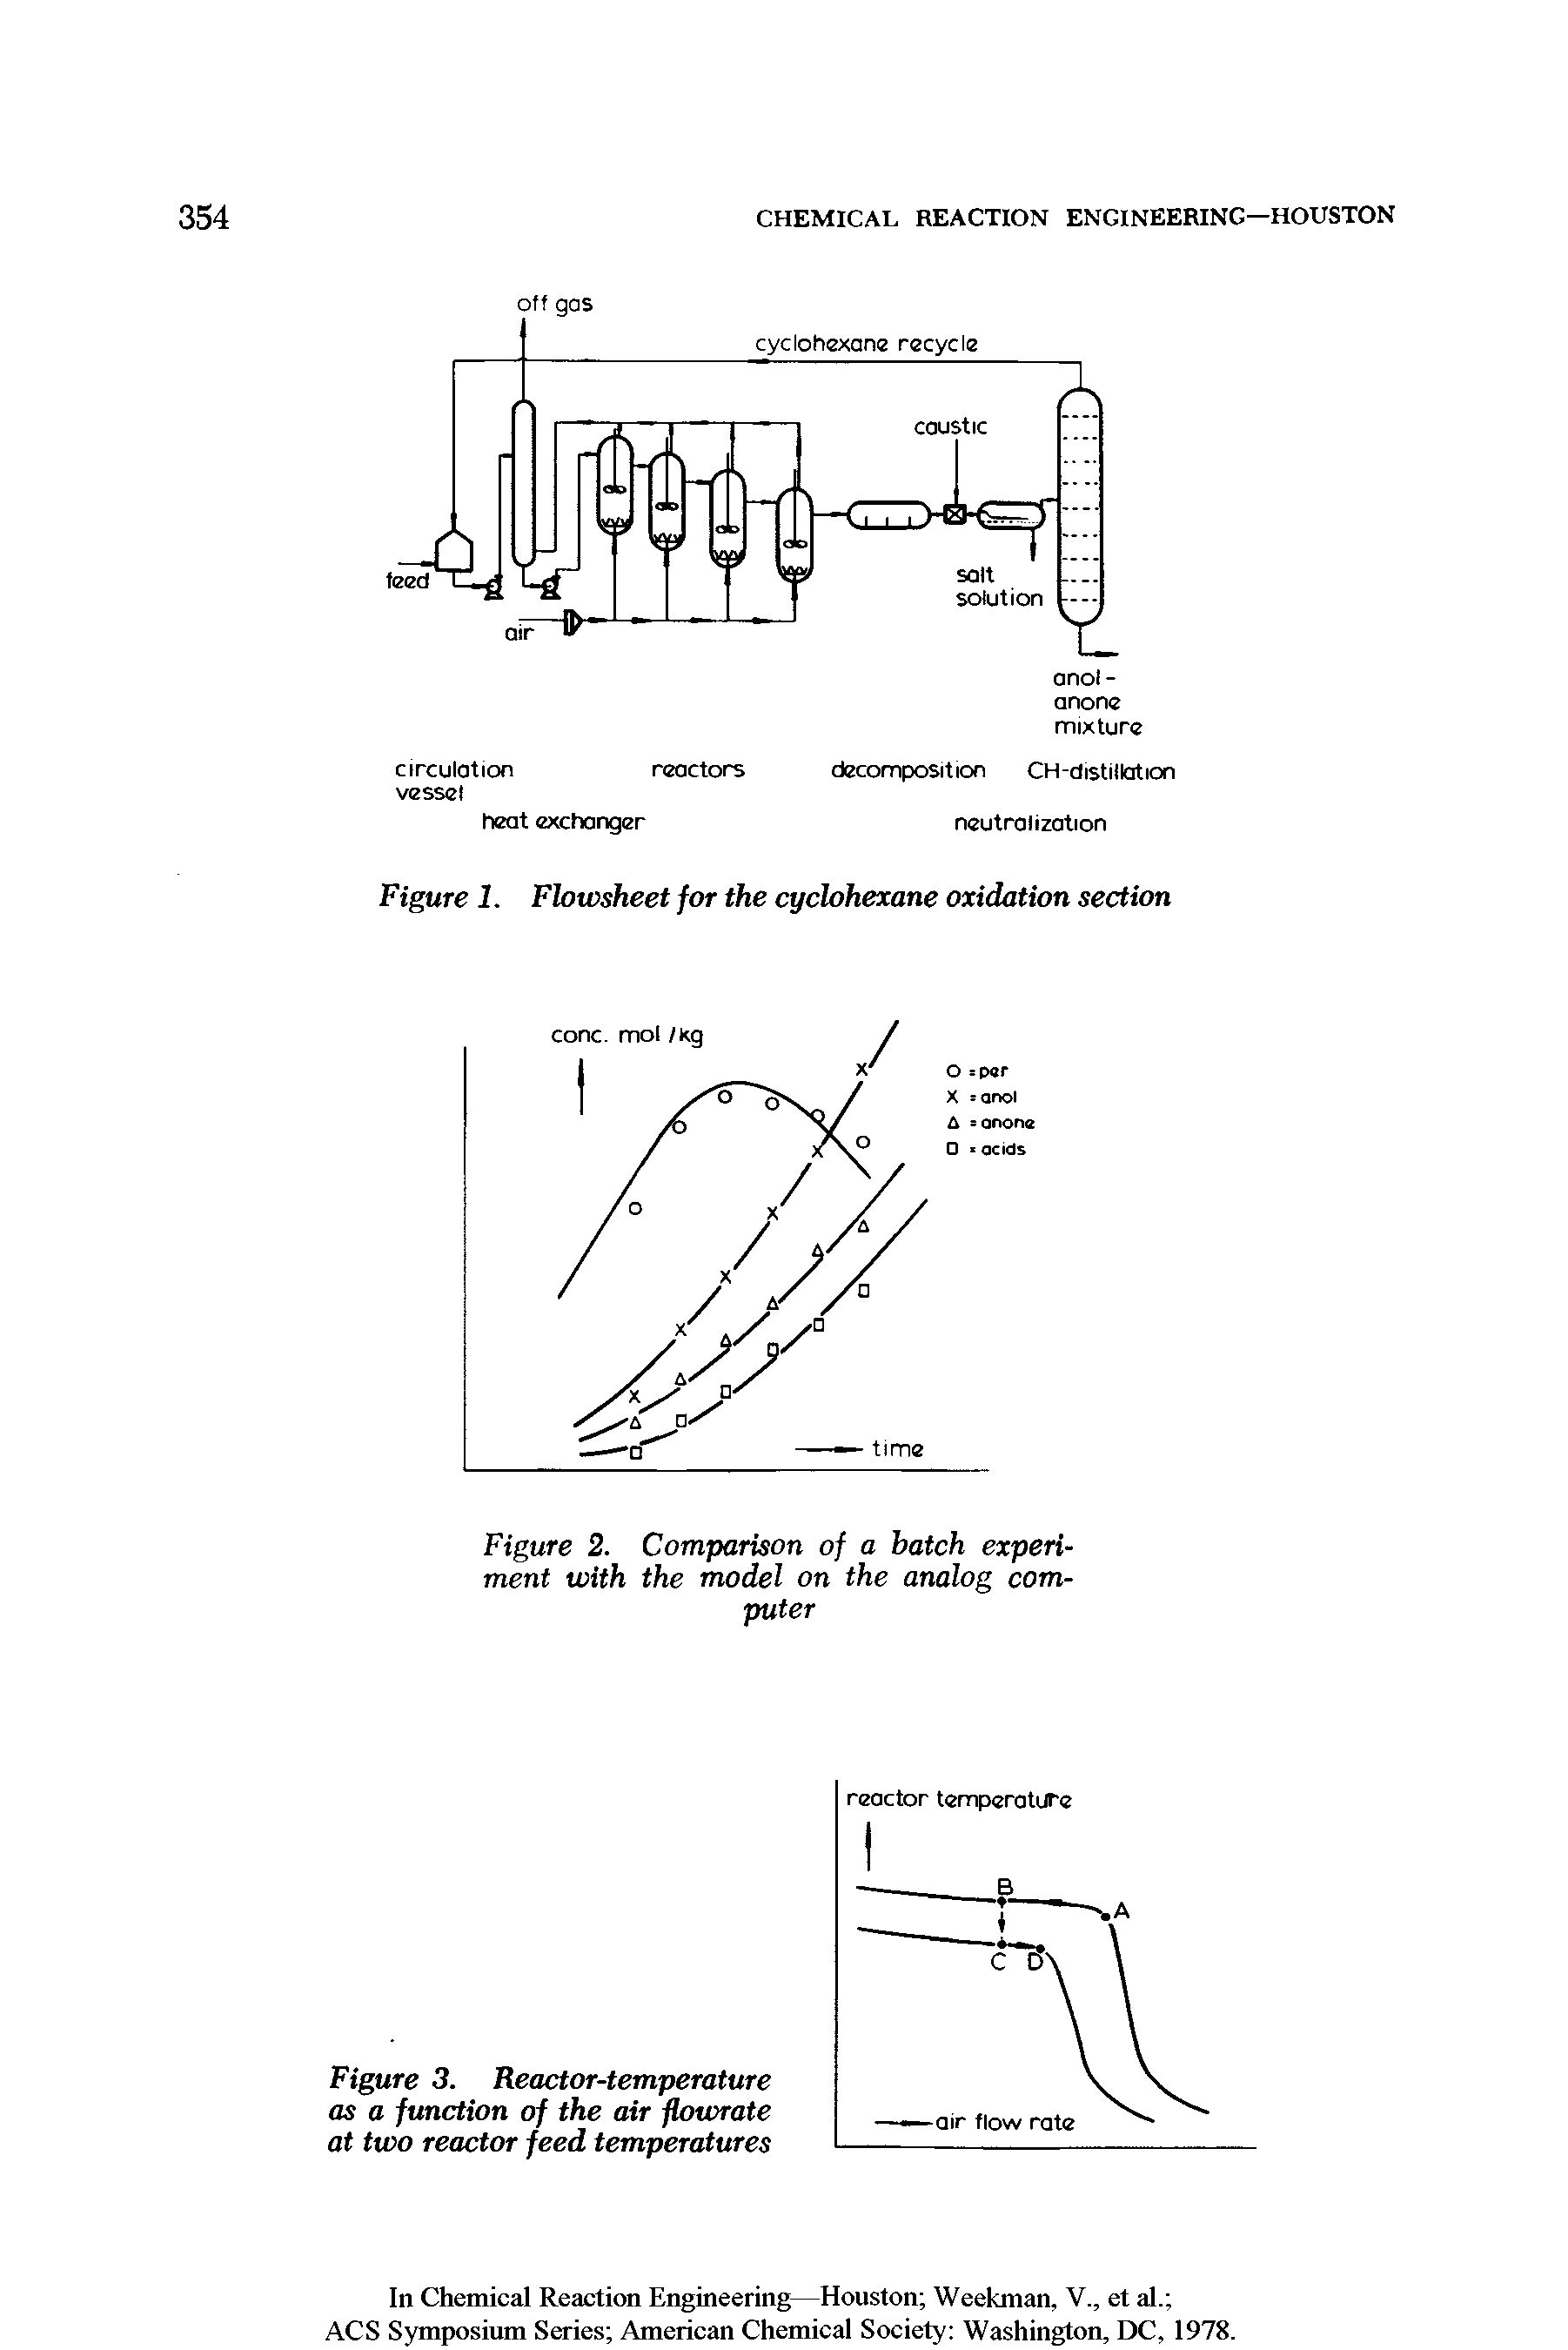 Figure 3. Reactor-temperature as a function of the air flowrate at two reactor feed temperatures...